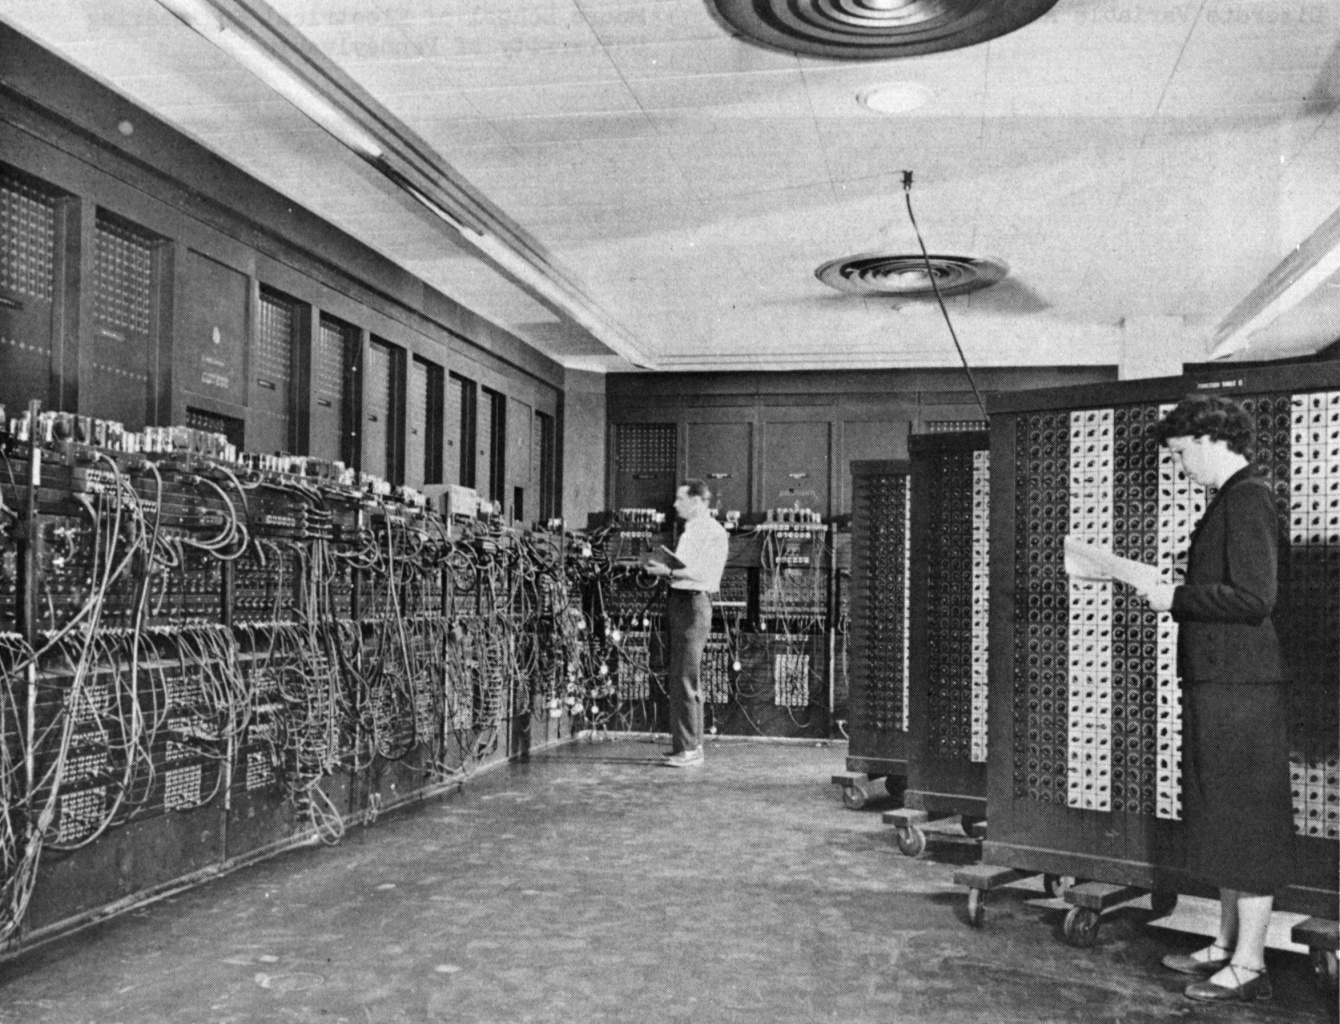 Glen Beck and Betty Snyder program the ENIAC in building 328 at the Ballistic Research Laboratory. U.S. Army Photo, Public domain, via Wikimedia Commons.